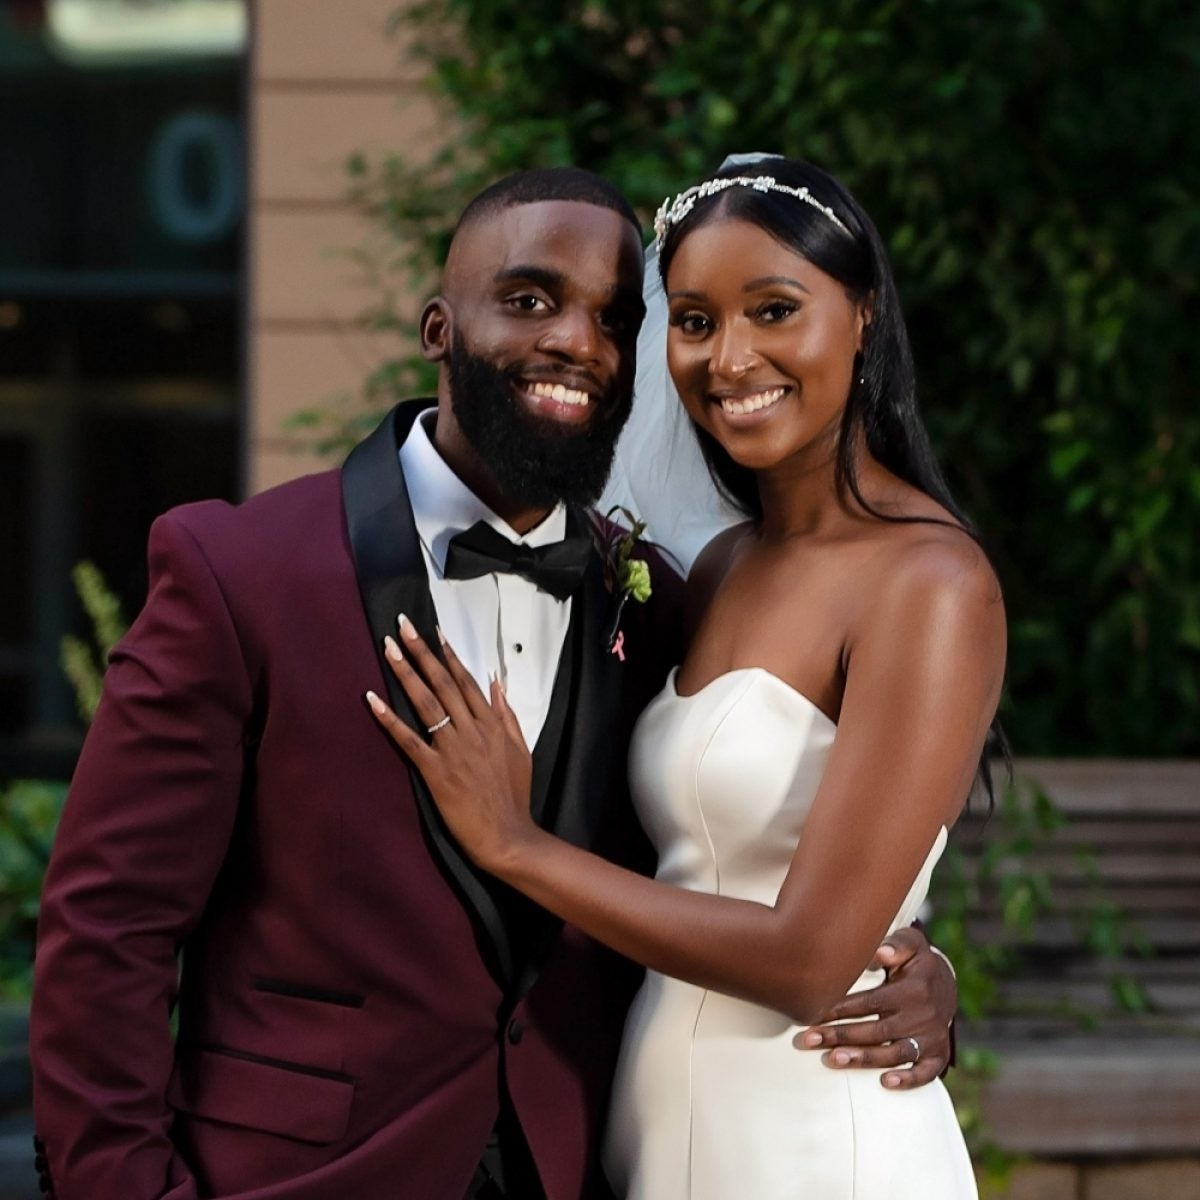 'A Sign From God' Motivated Jasmina To Get 'Married At First Sight'